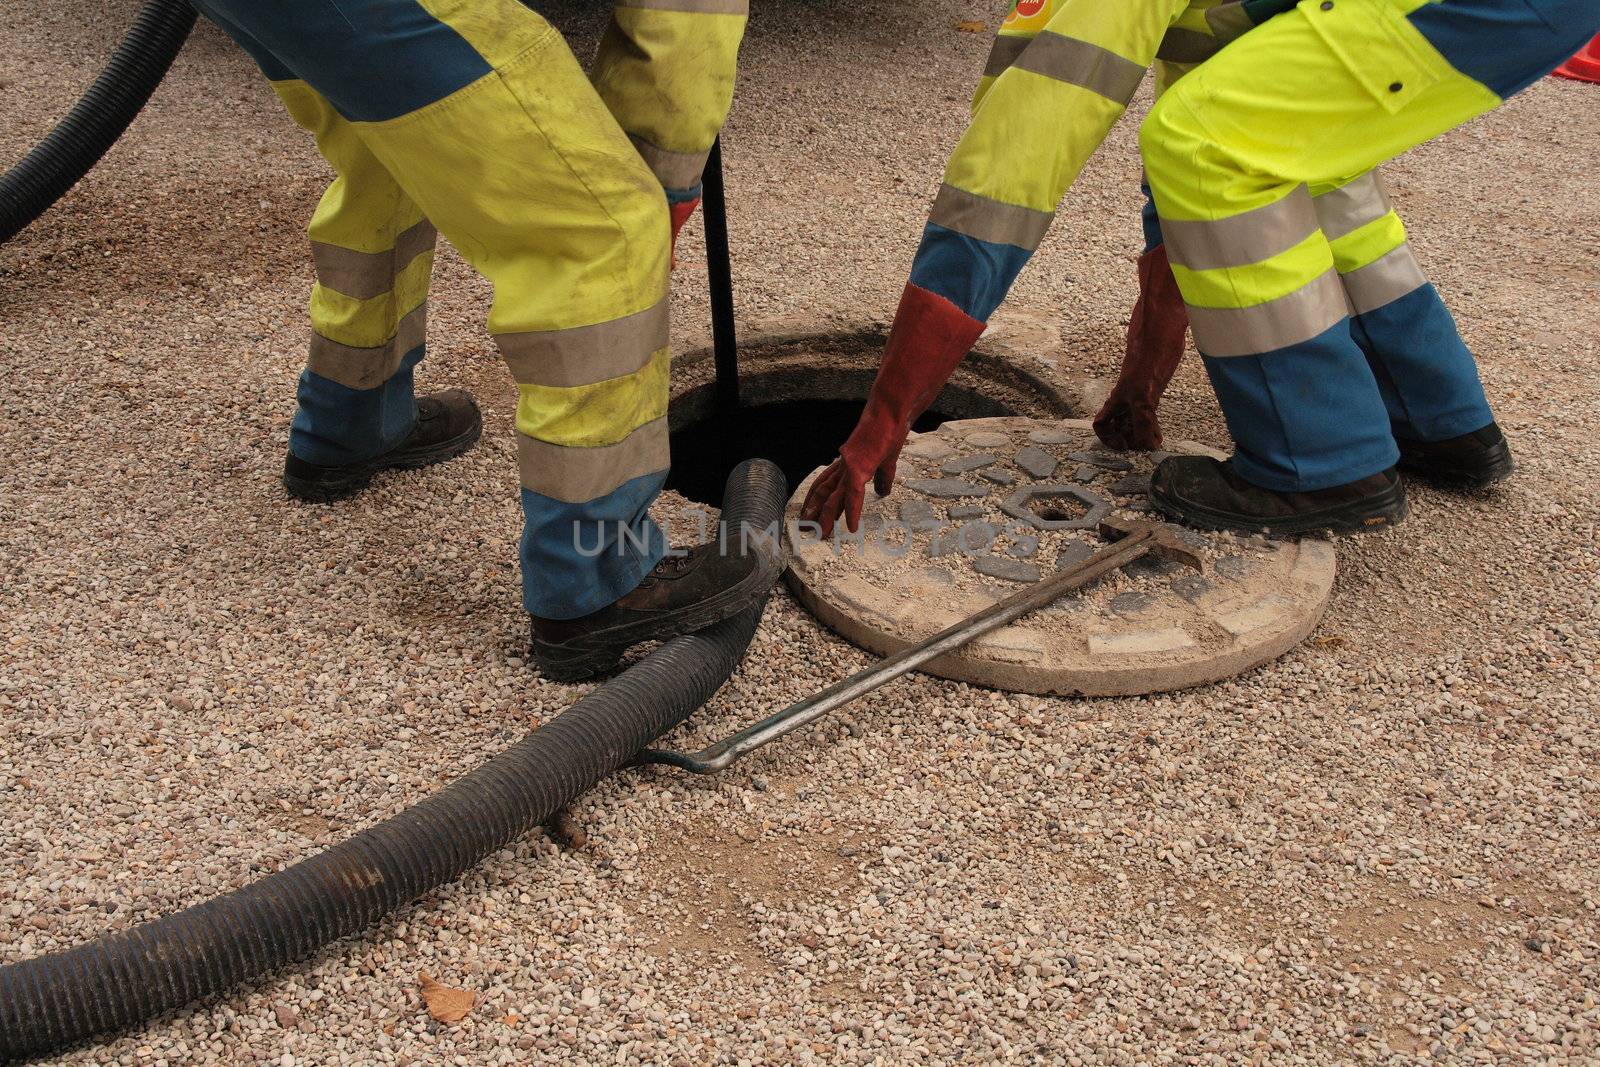 Sewer workers in action, cleaning sewers